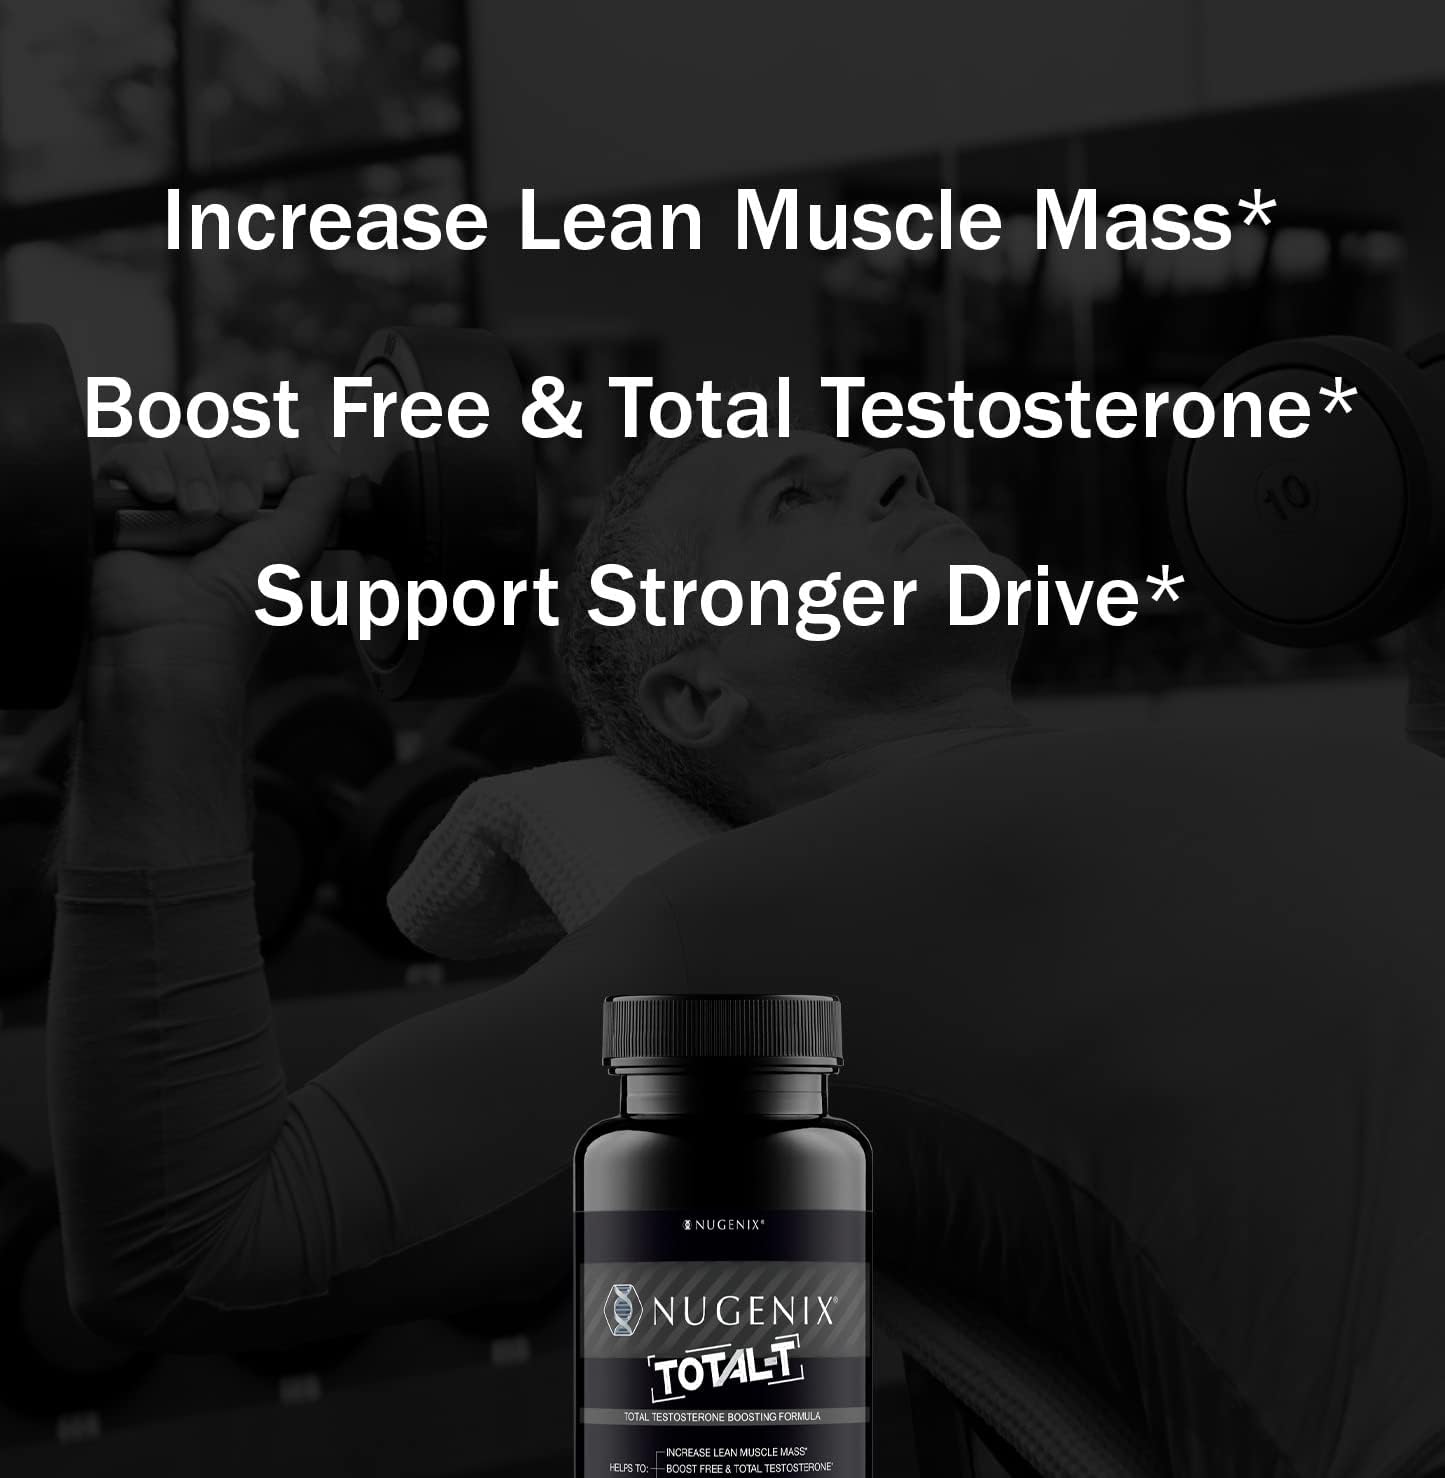  Nugenix Total-T, Free and Total Testosterone Booster Supple